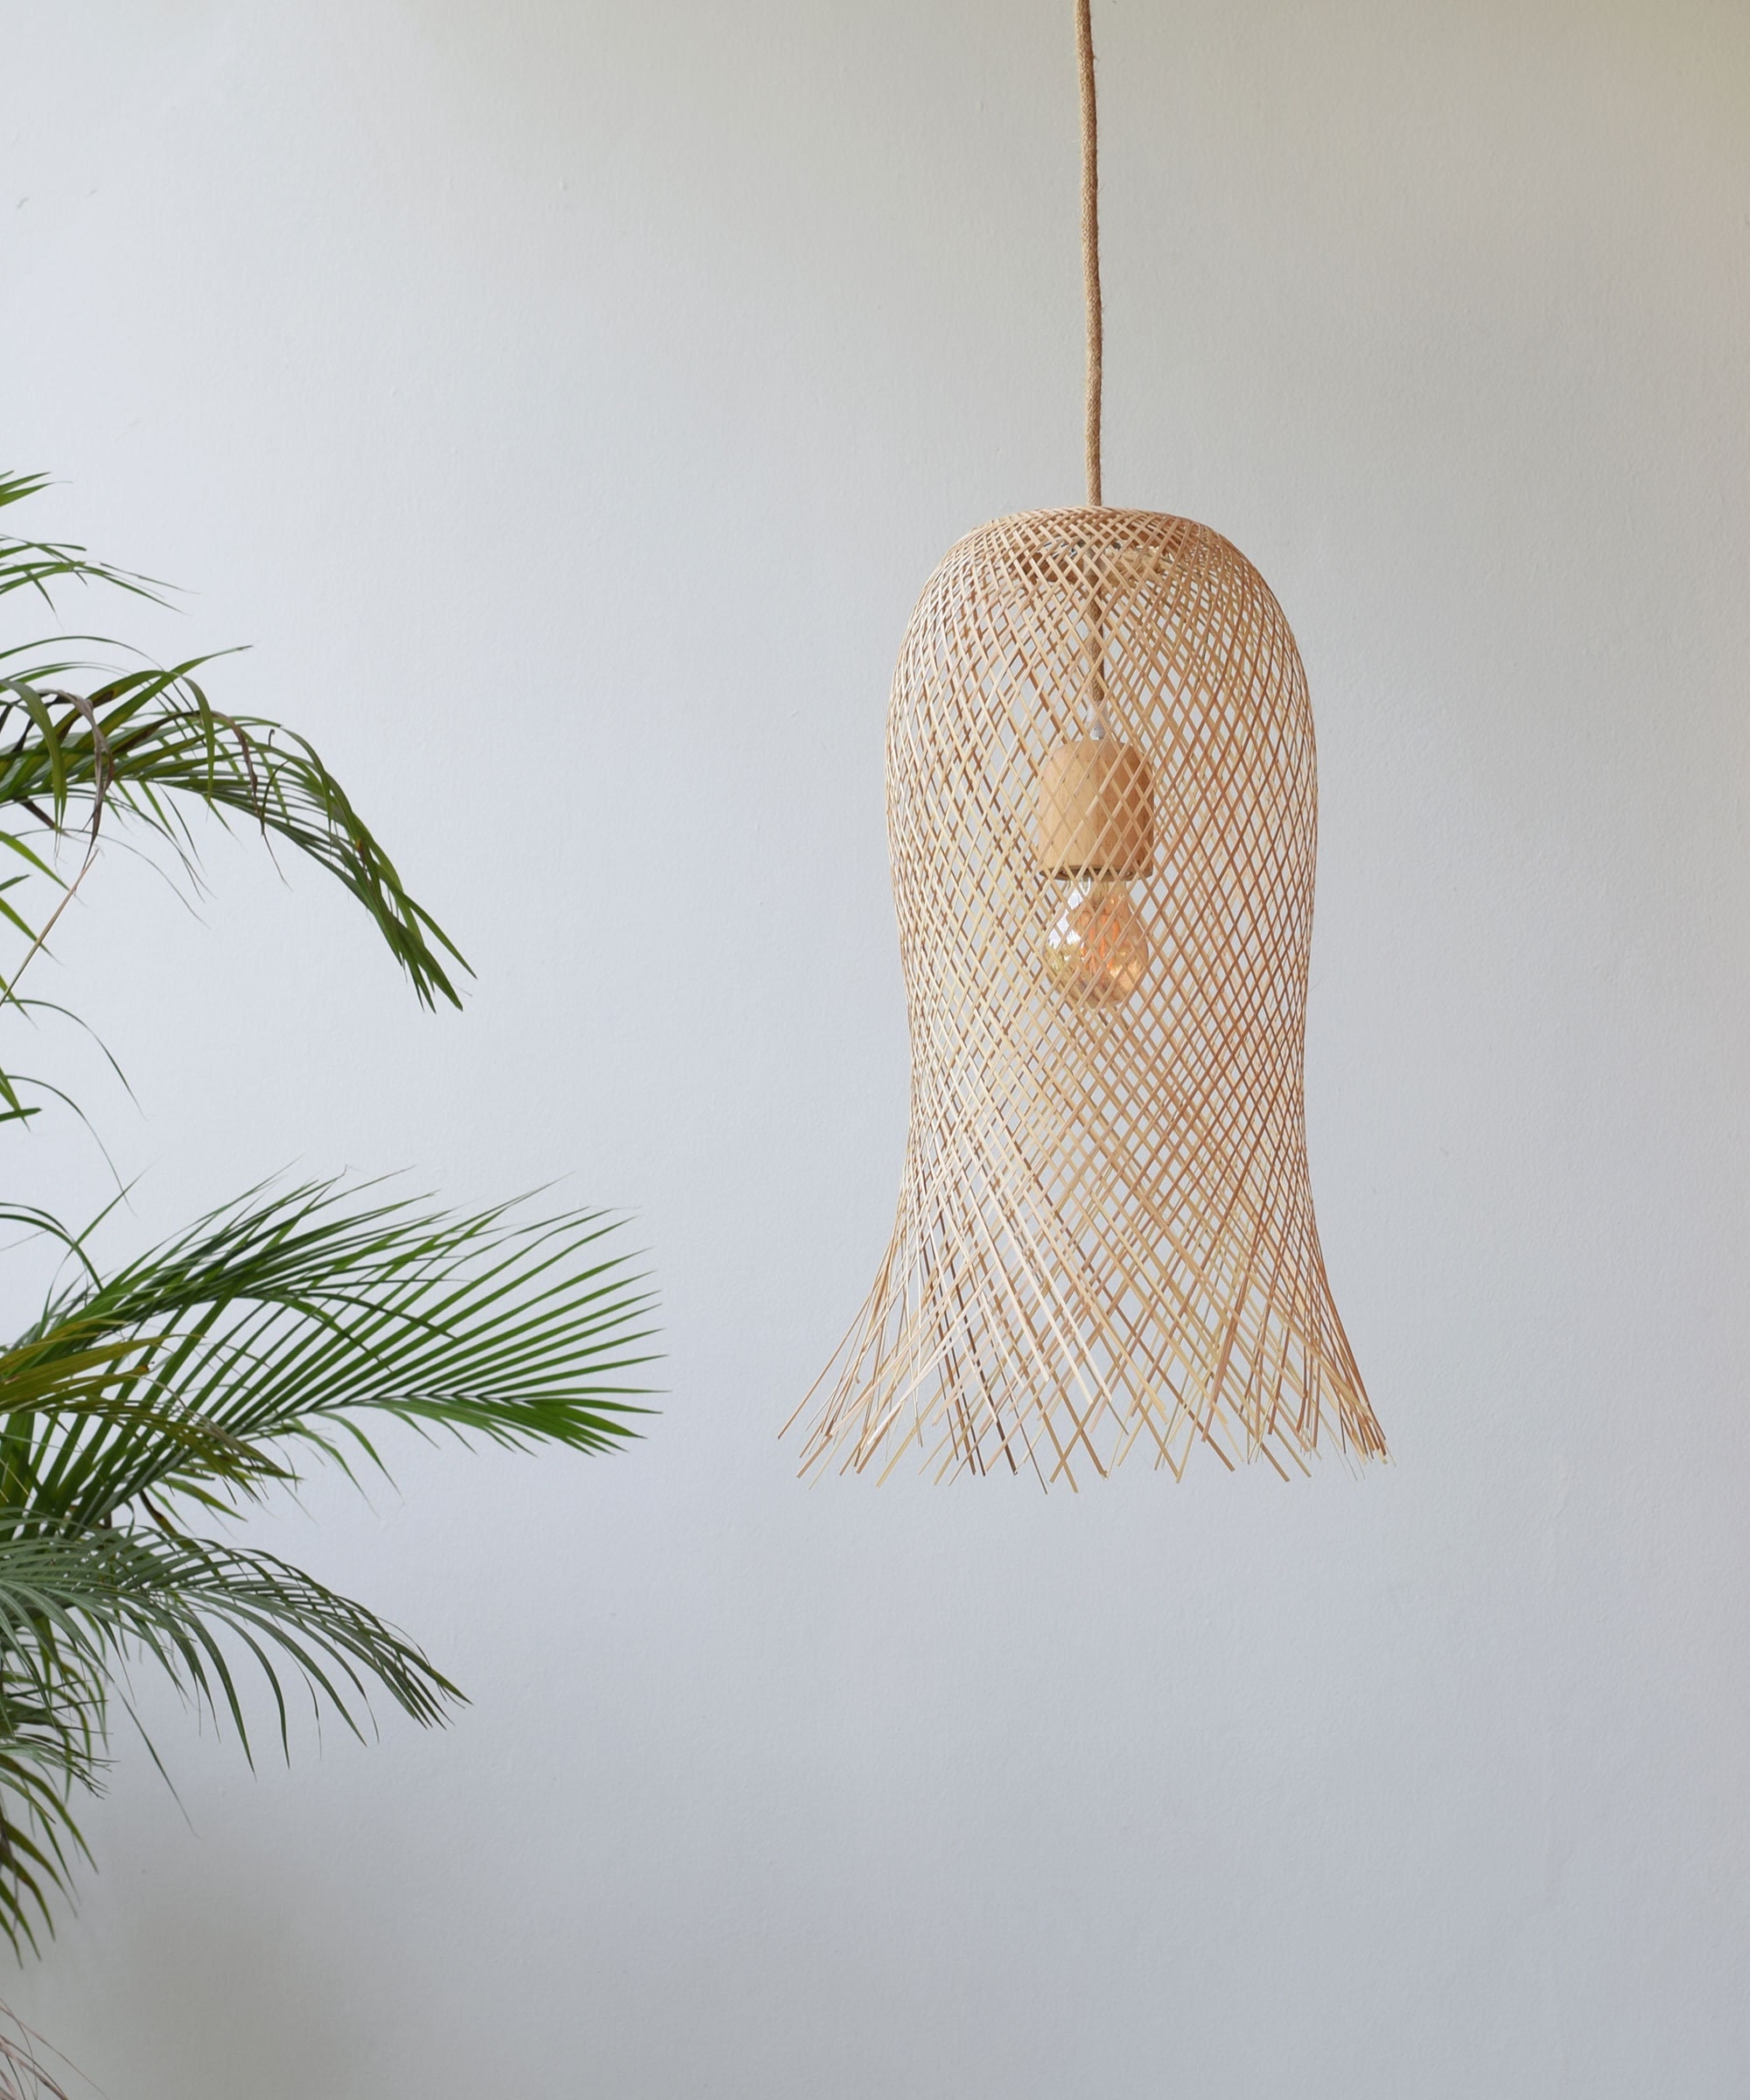 Lanna Passa - Cone Shaped Bamboo Pendant & Thick Rope Cable